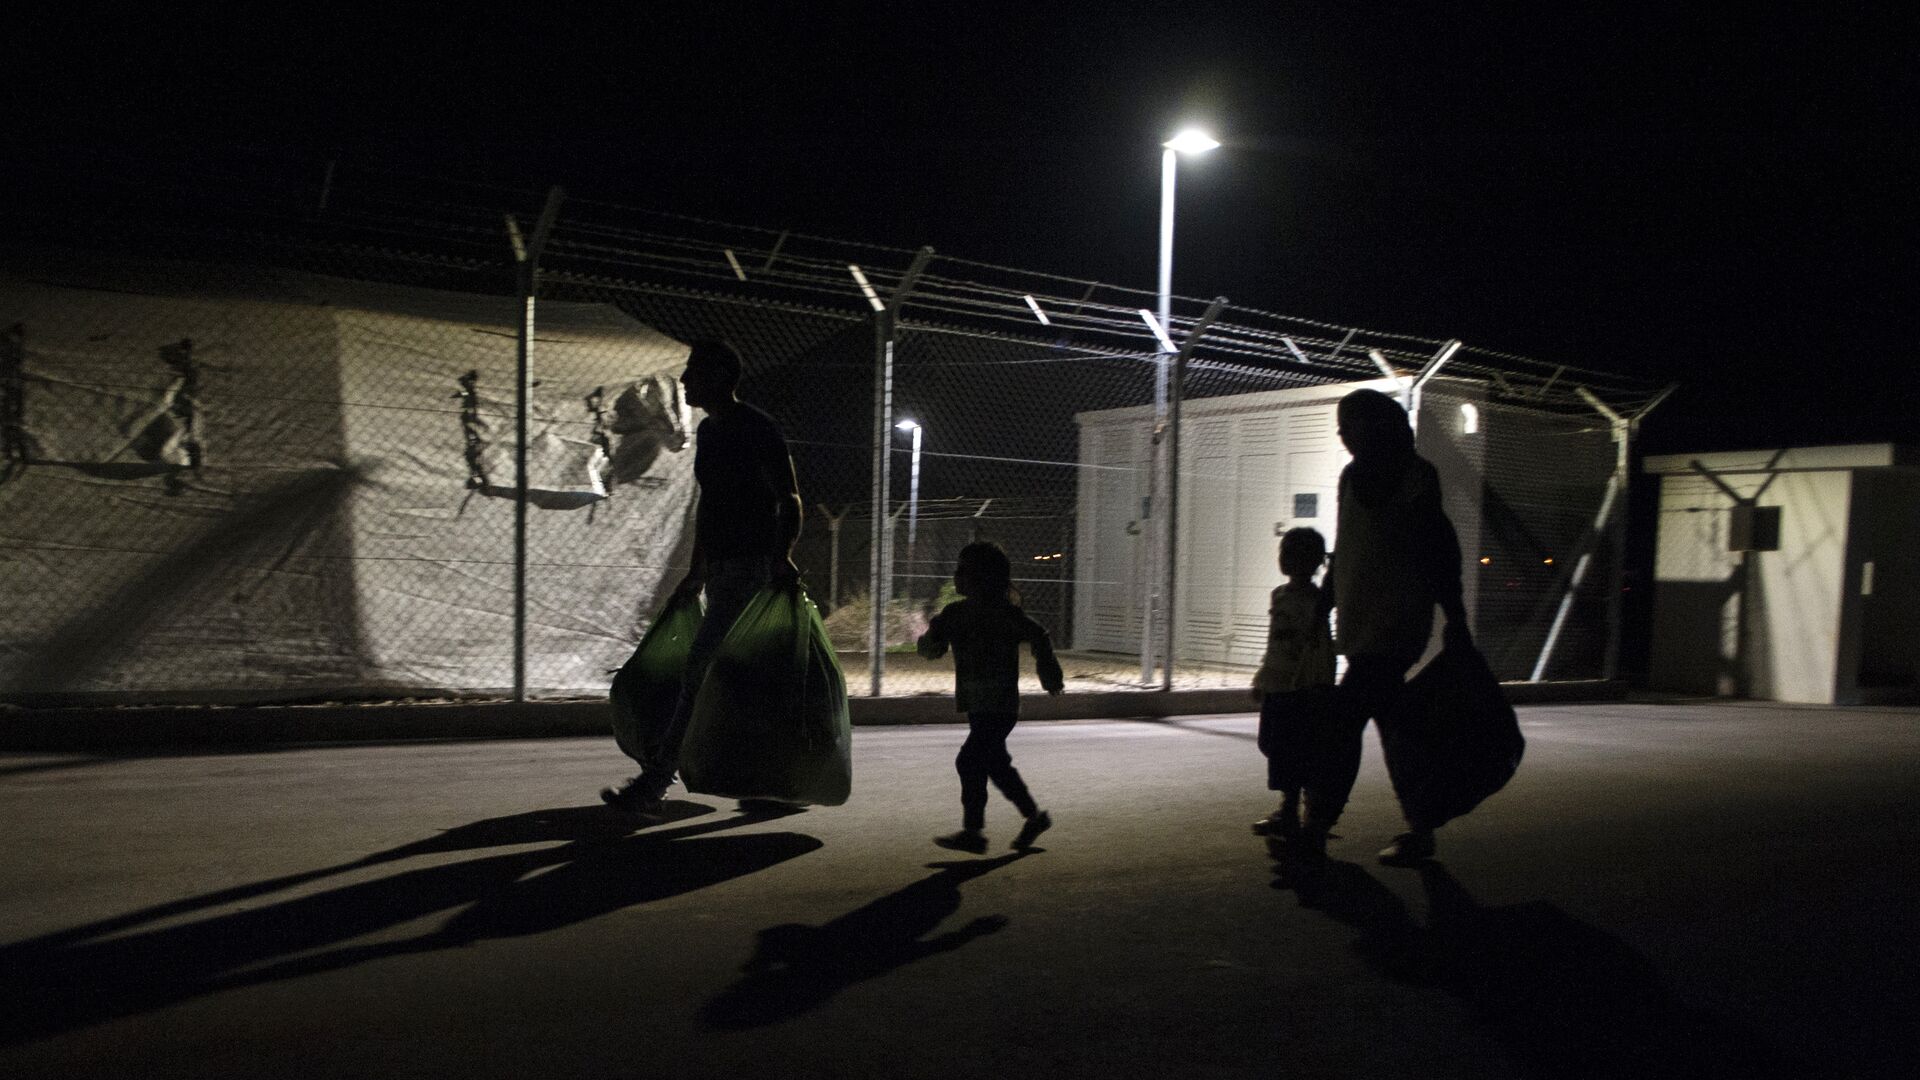 Migrants, who had applied for asylum in Cyprus, arrive with their belongings at Kokkinotrimithia refugee camp, west of the capital Nicosia, on November 19, 2015, after being transferred from Dhekelia by Cypriot authorities - Sputnik International, 1920, 31.10.2021